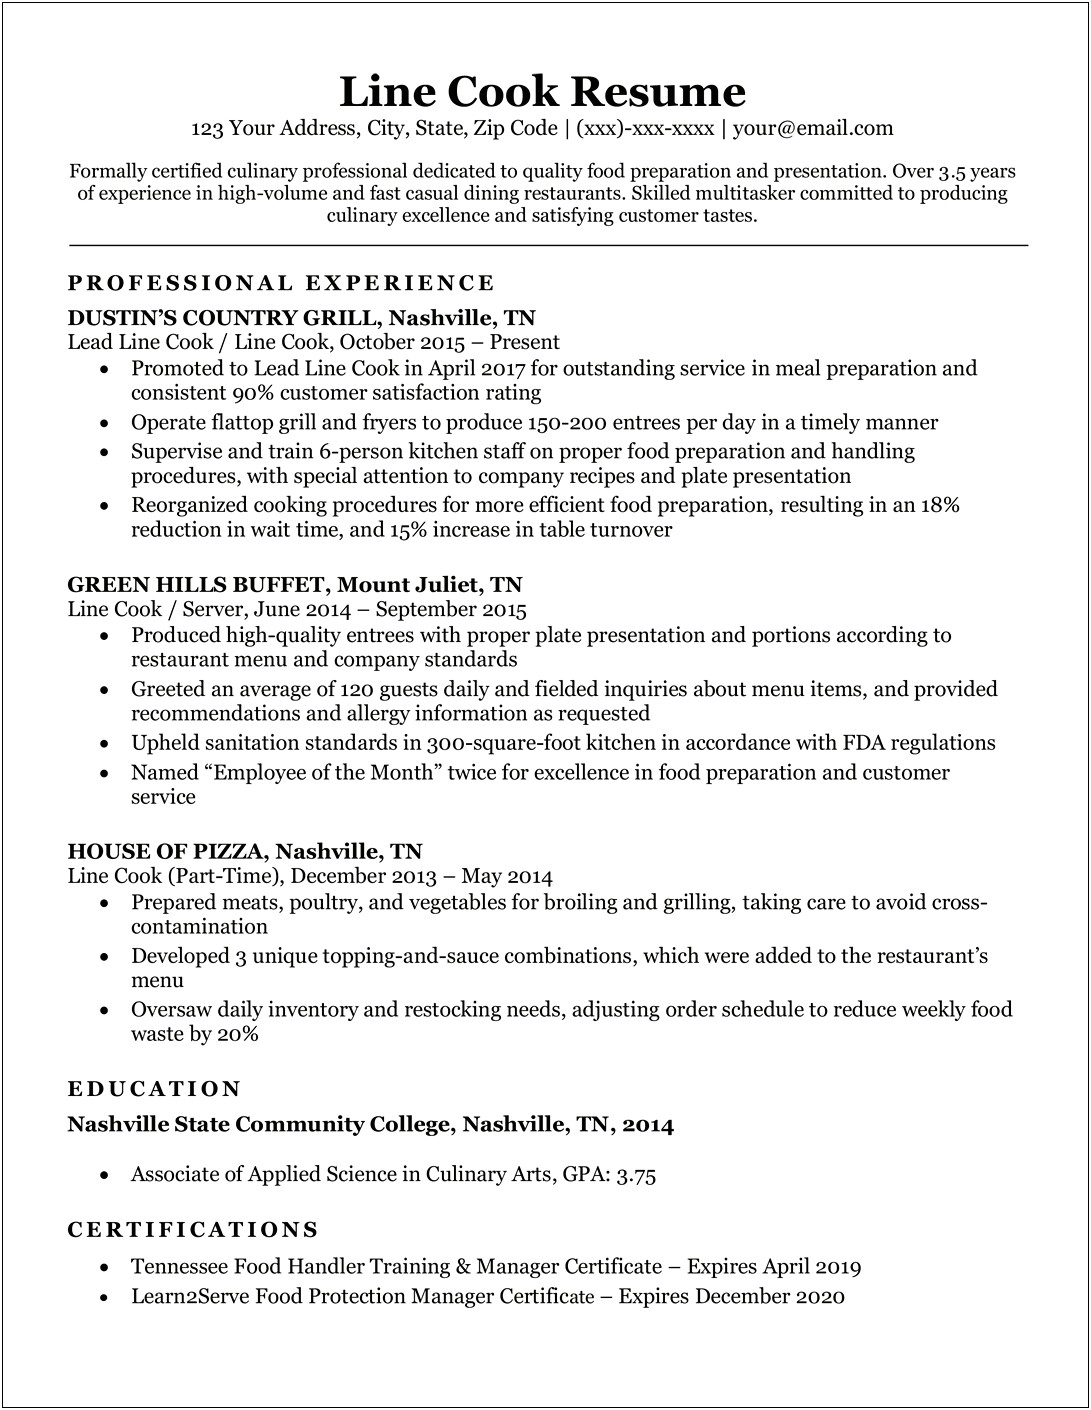 Sample Resume For Culinary Position